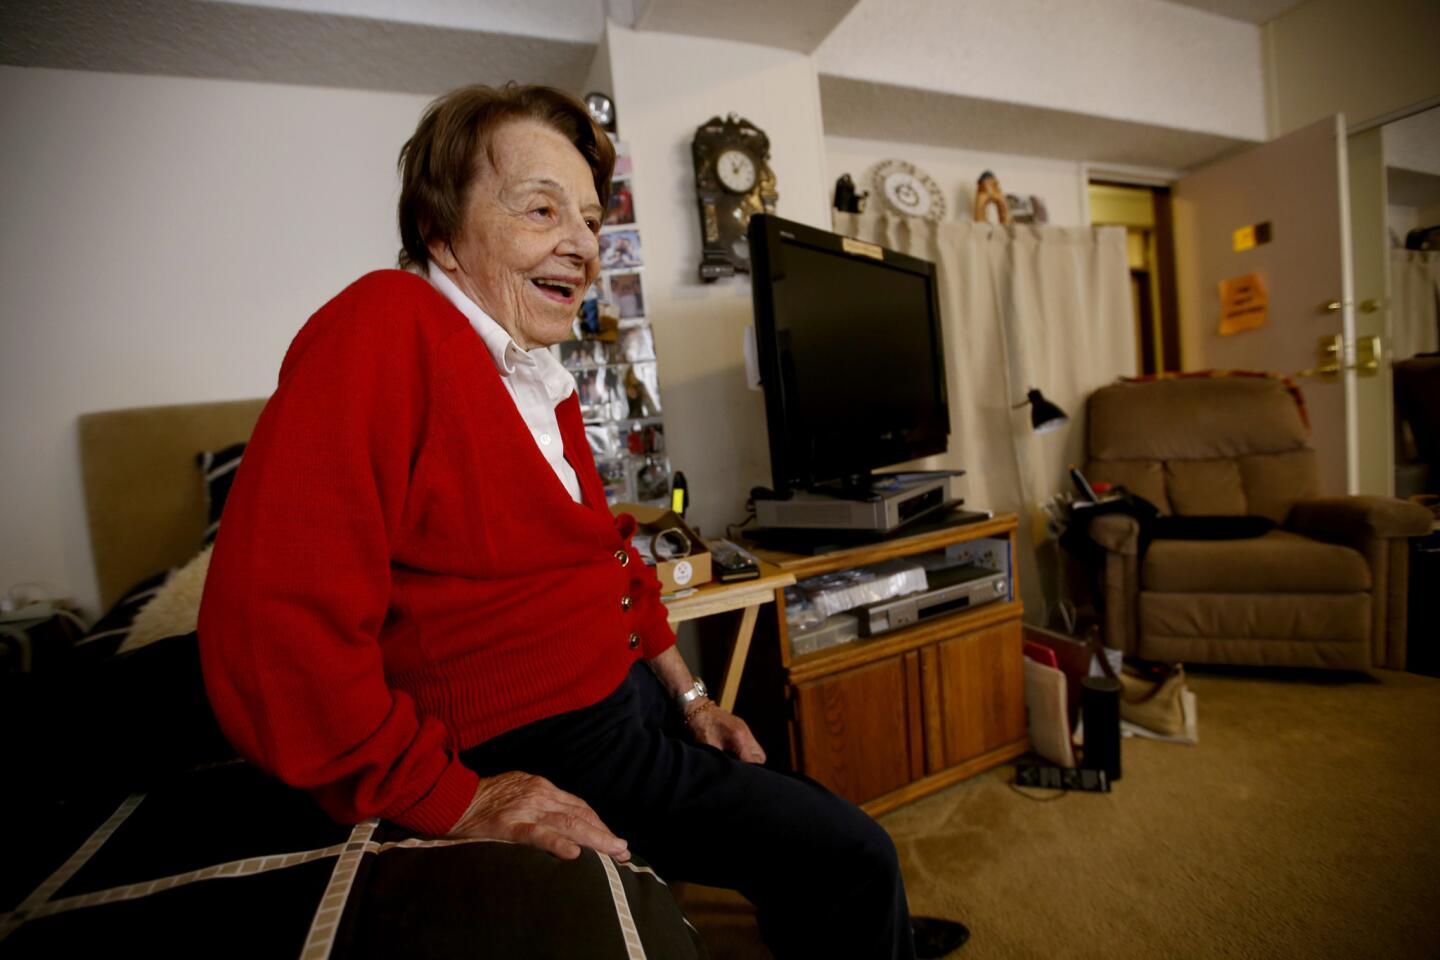 Flossy Liebman, 95, has lived in her apartment at the Vintage Westwood Horizons retirement home for six years and does not want to move.